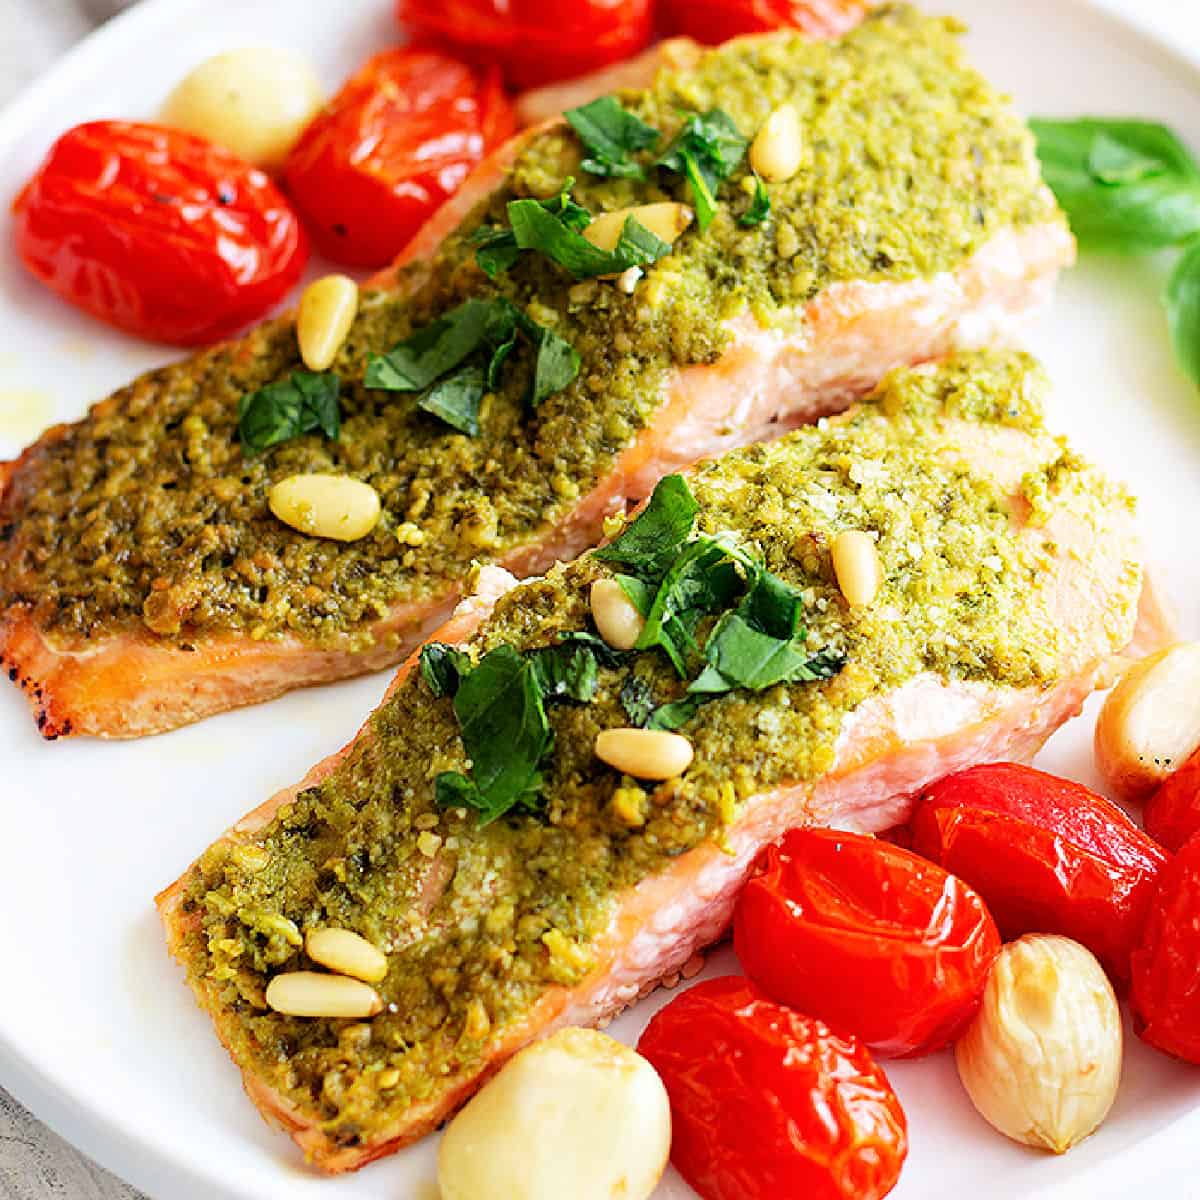 An easy baked pesto salmon recipe that even picky eaters love! Have dinner on the table within 25 minutes using this simple yet delicious recipe.
